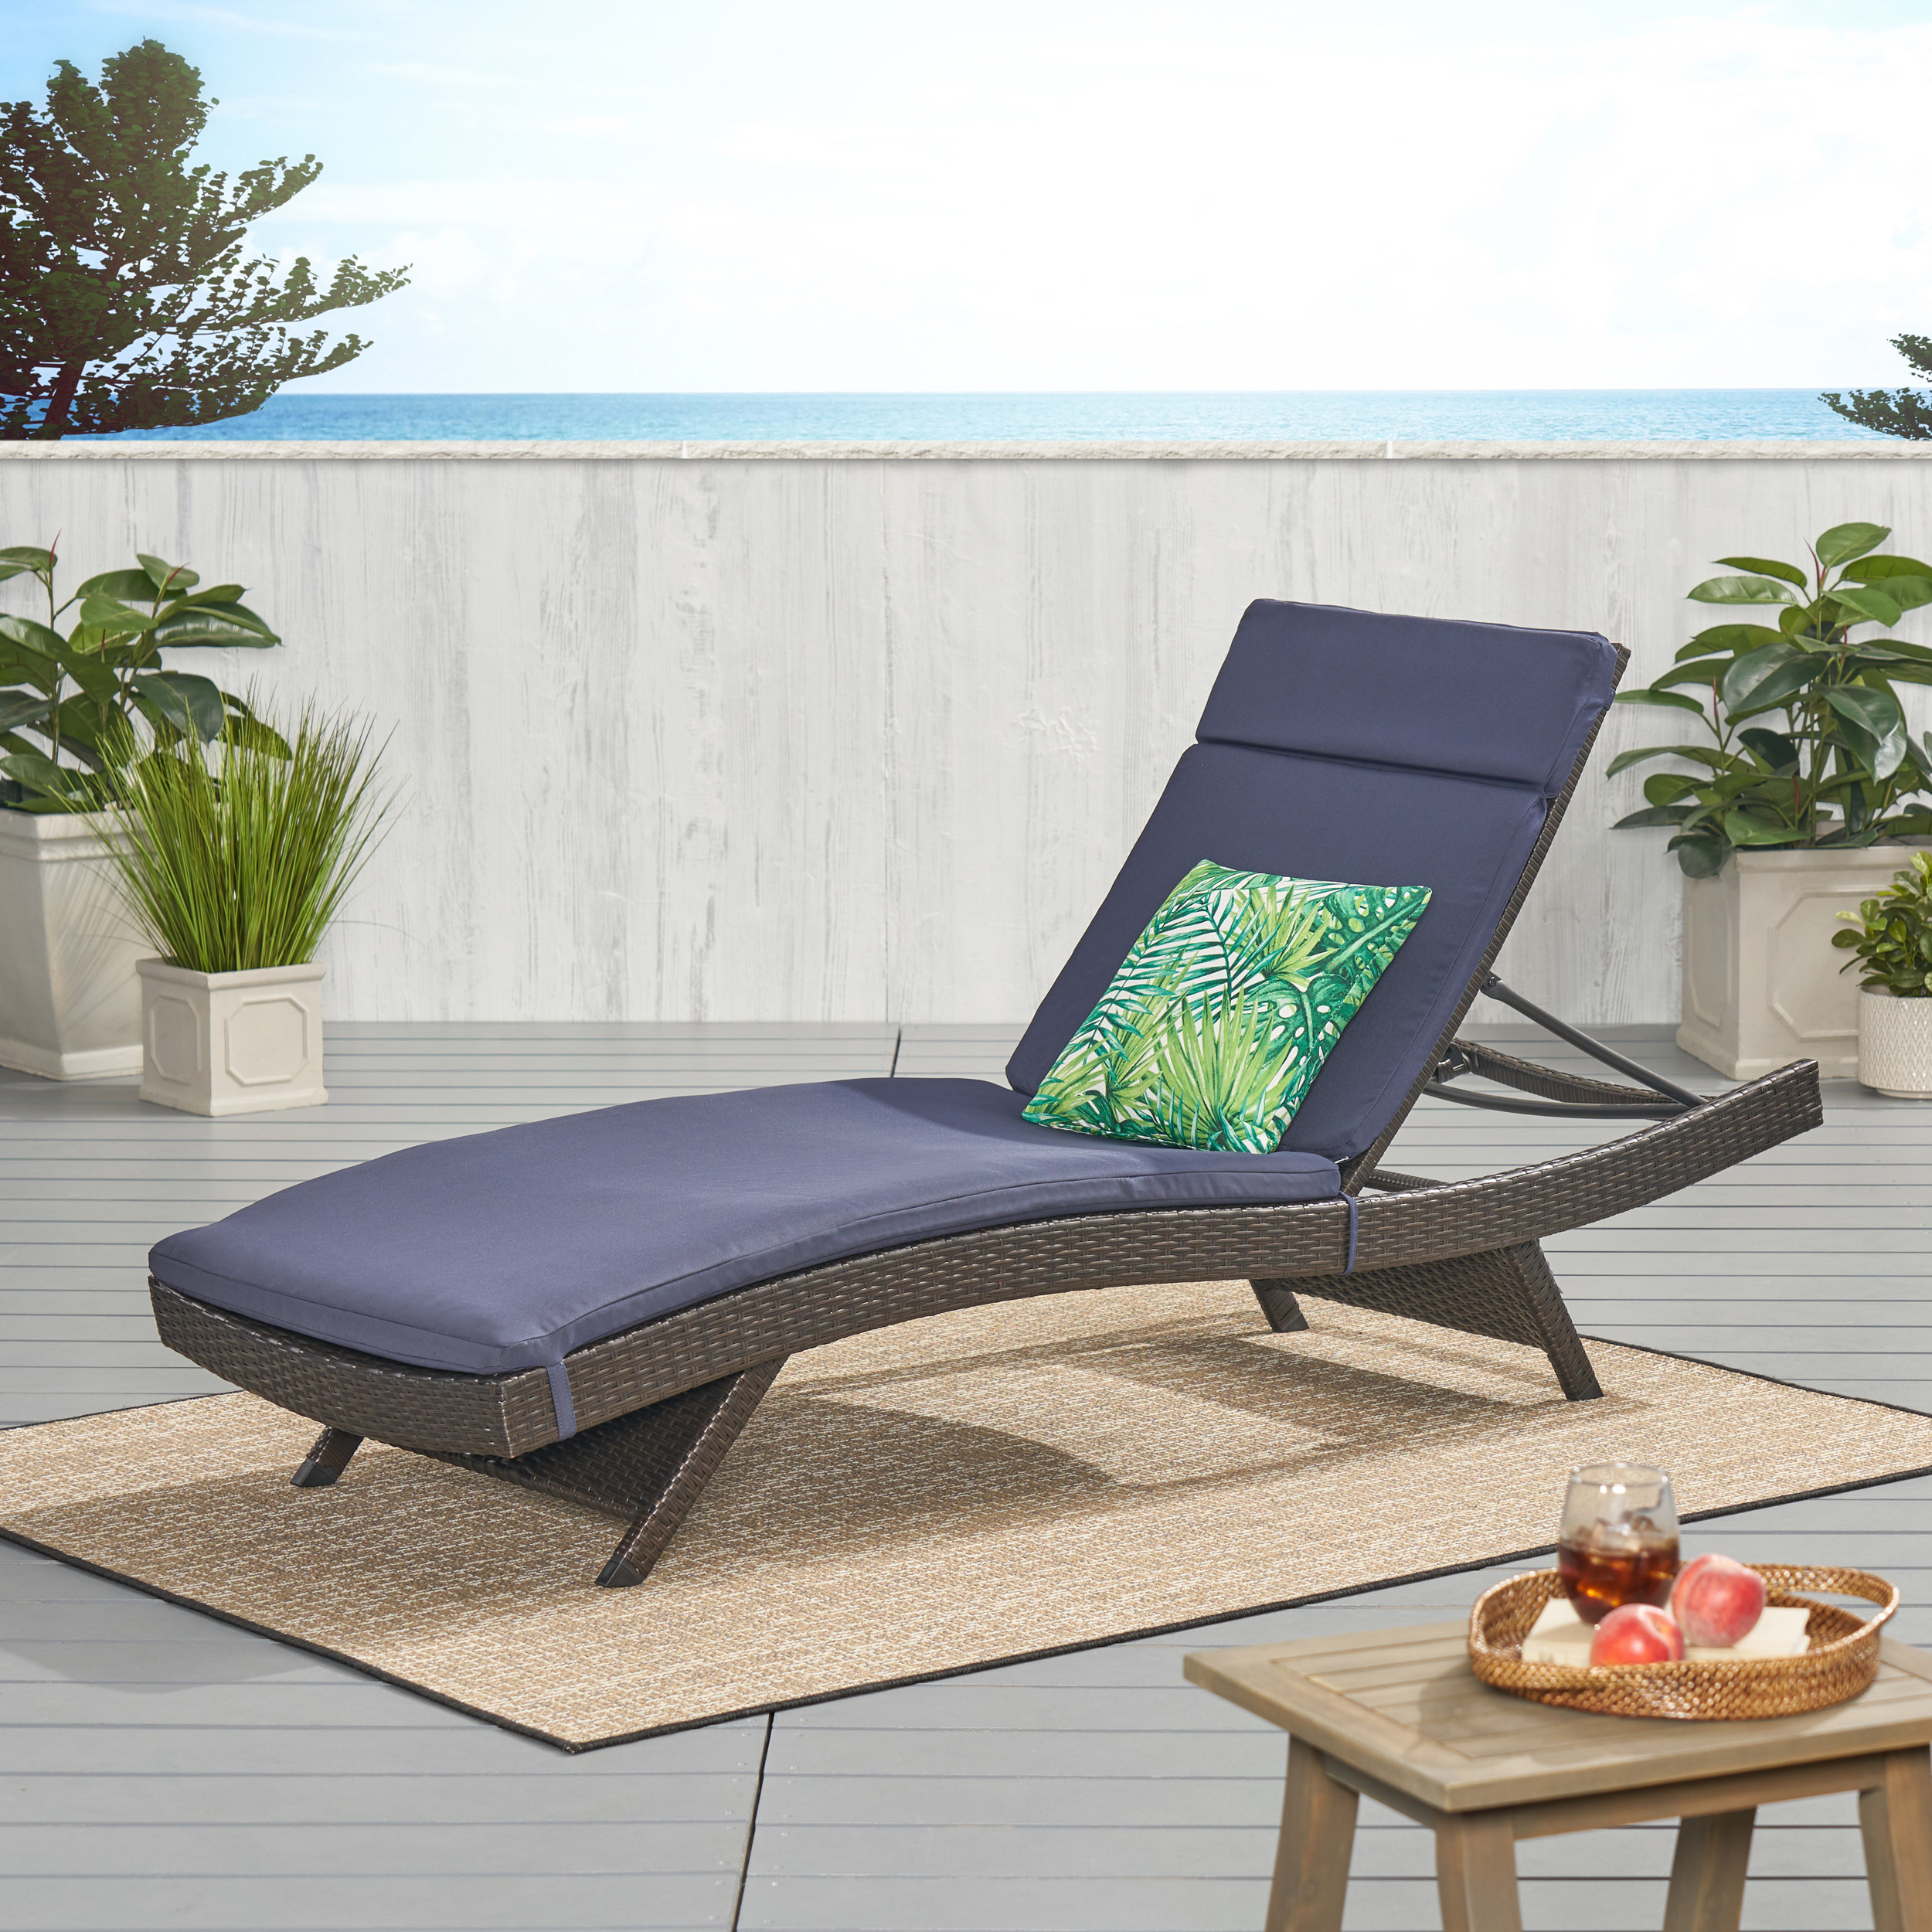 Lakeport Outdoor Adjustable Chaise Lounge Chair With Cushion - Textured Beige Cushion